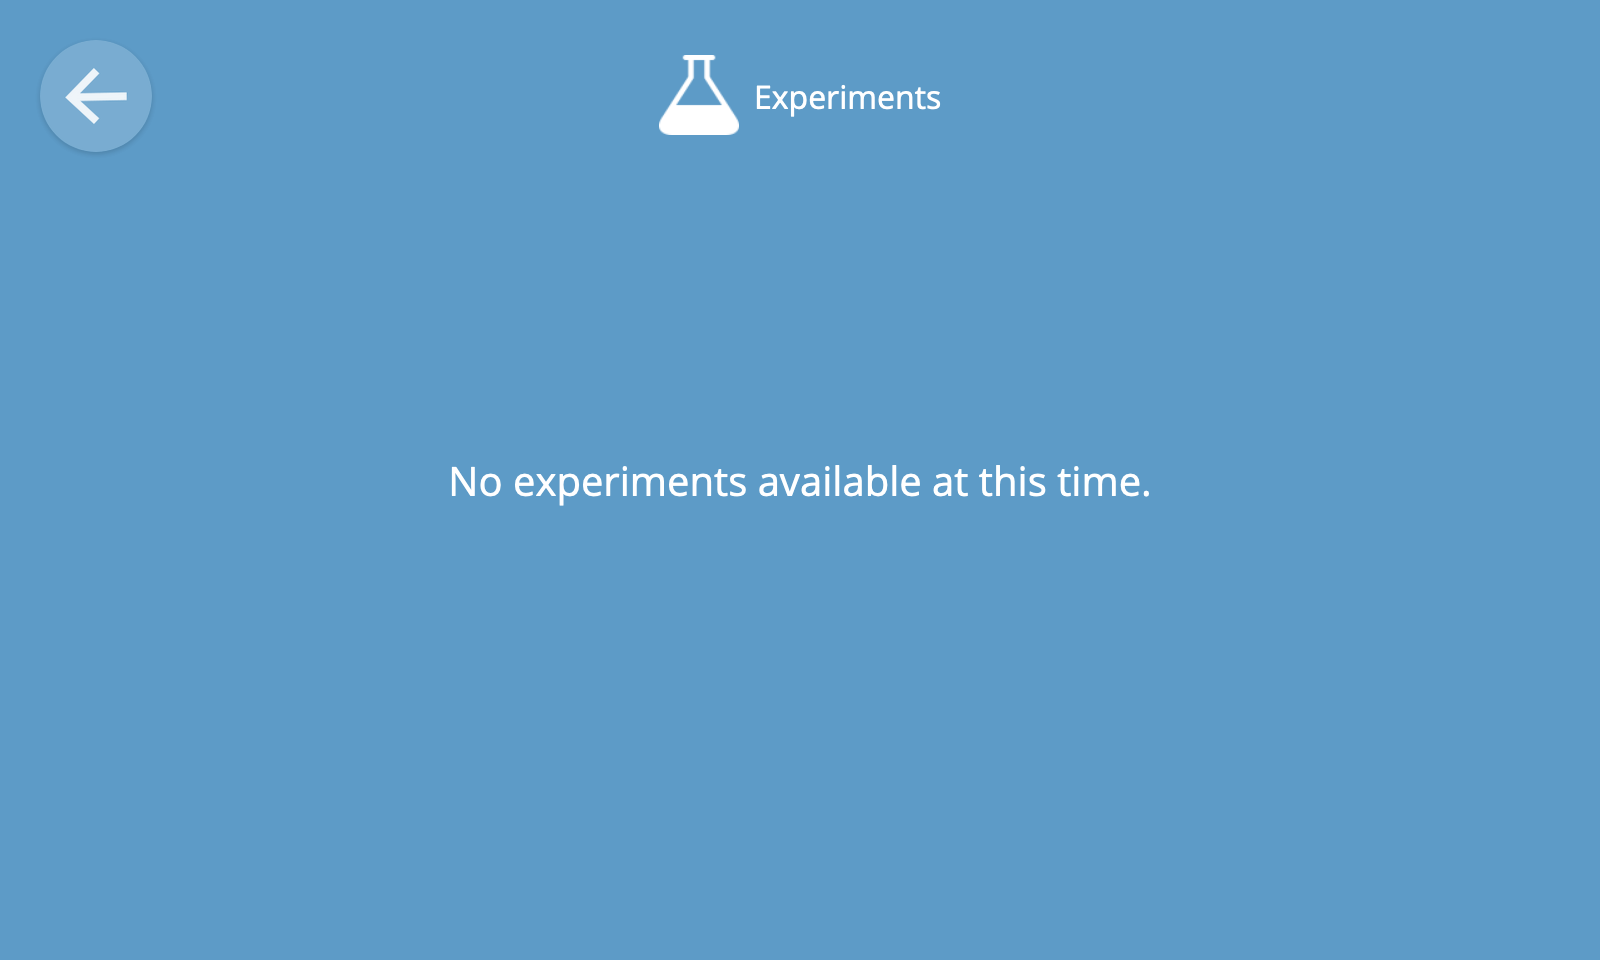 Screenshot of the experiments view, showing there are currently no experiments available